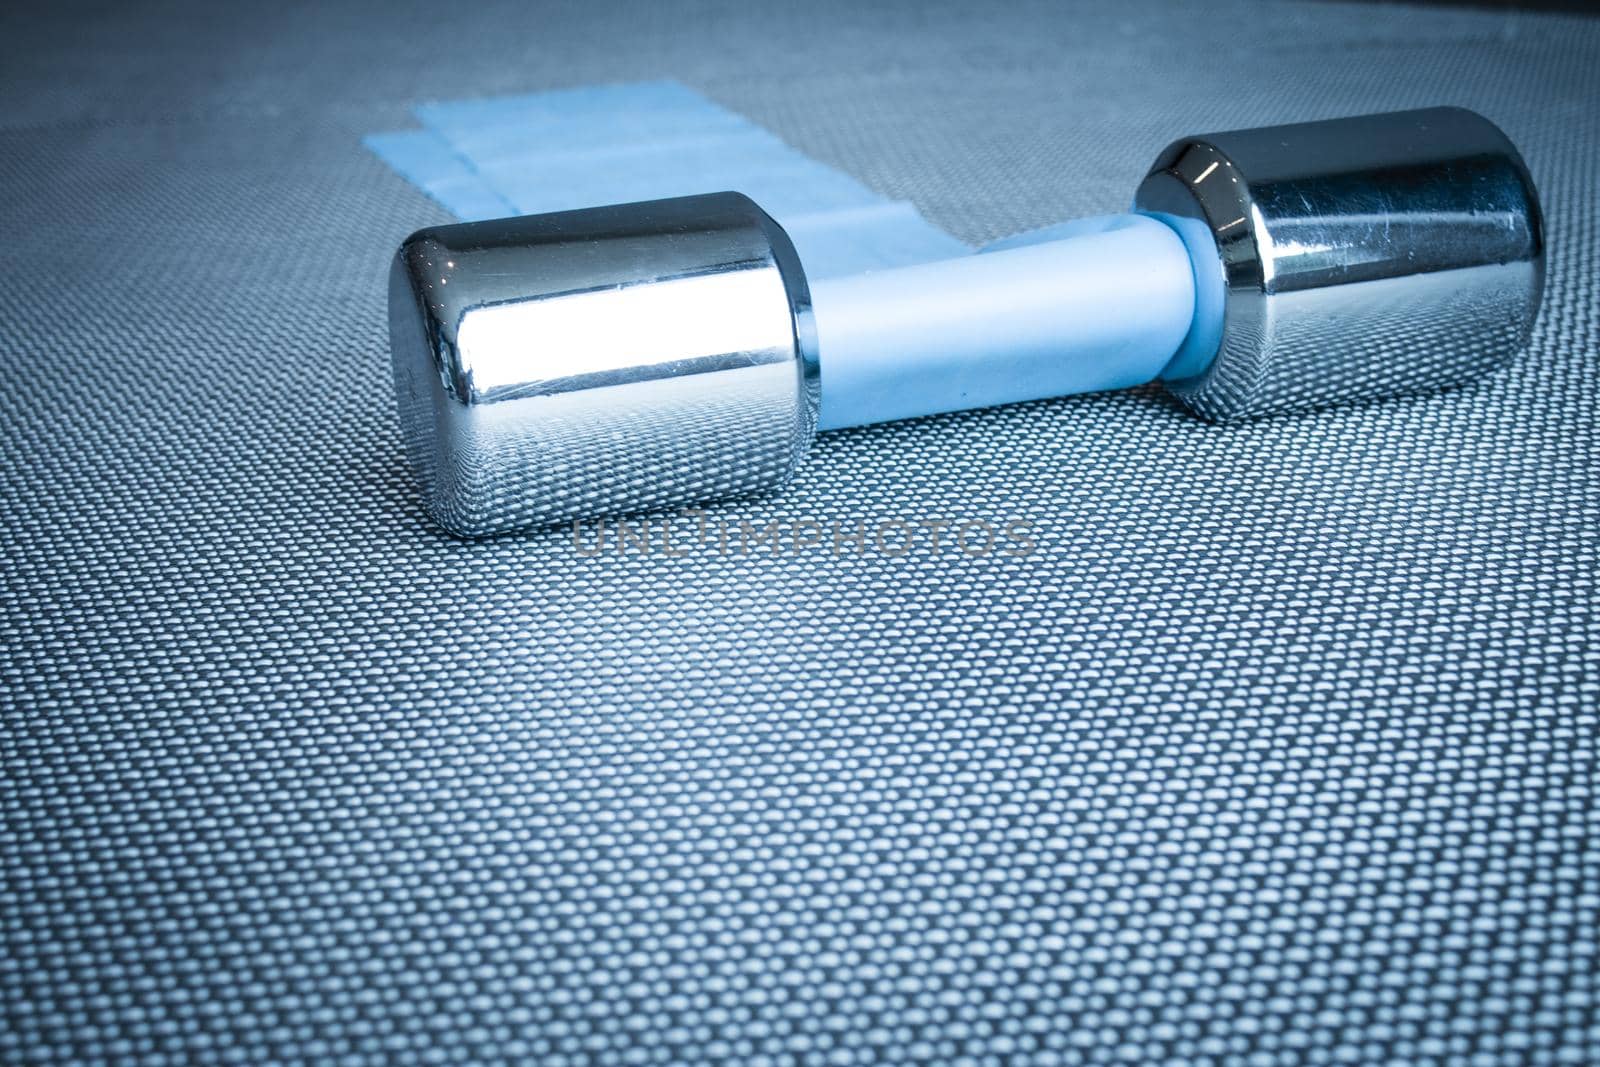 Silver dumbbell next to elastic band for pilates exercises. No people